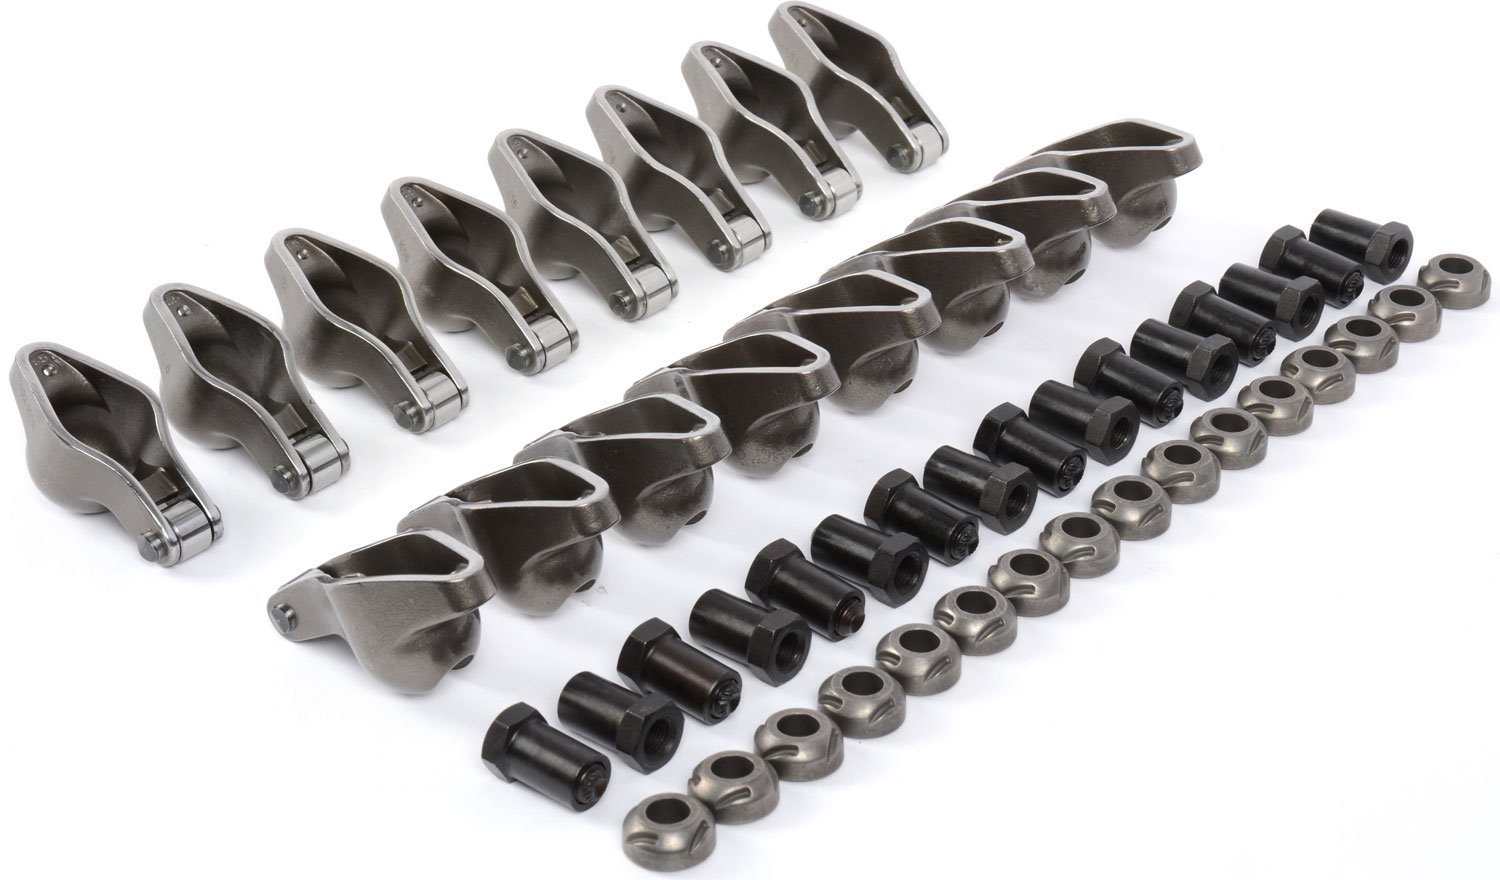 Cast Steel Roller Tip Rocker Arms for 1955-1986 Small Block Chevy [Set of 16]